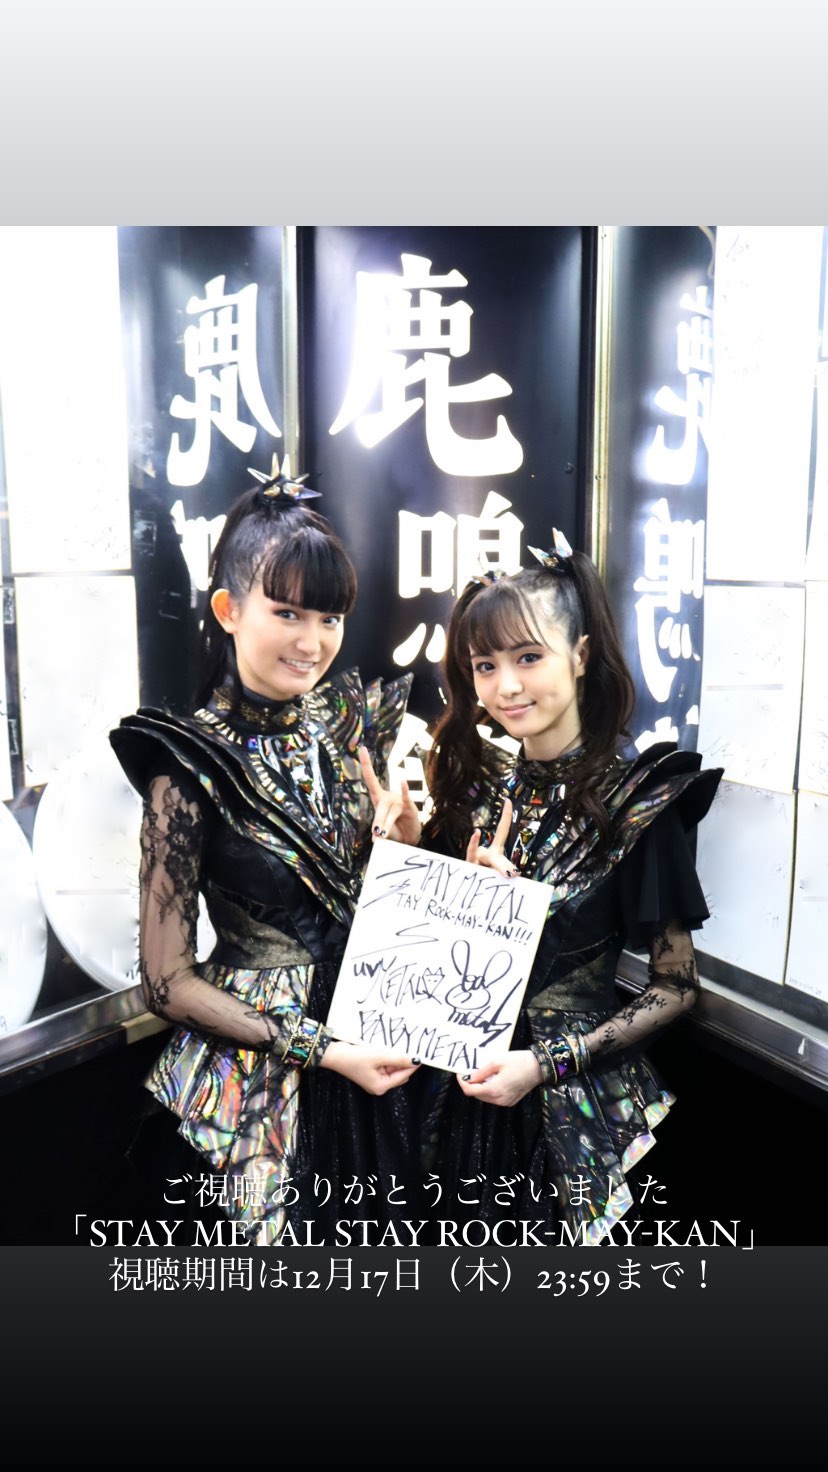 SU-METAL and MOAMETAL returning to the Meguro Rock-May-Kan